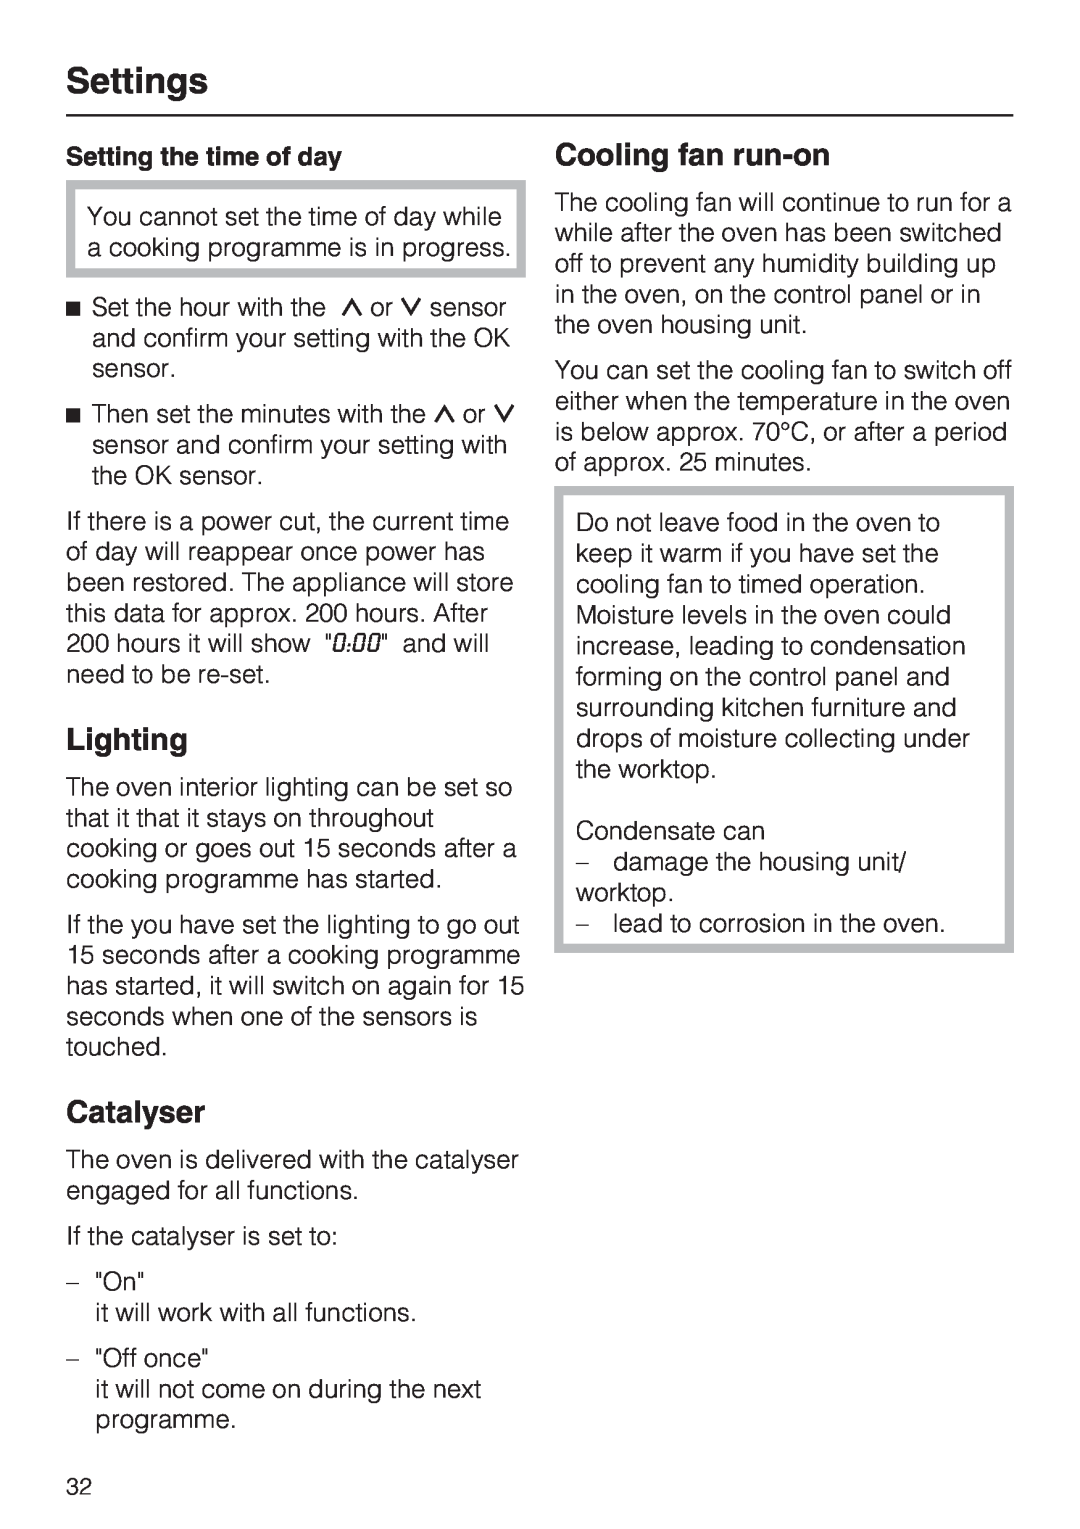 Miele H 5460-BP installation instructions Lighting, Catalyser, Cooling fan run-on, Setting the time of day, Settings 